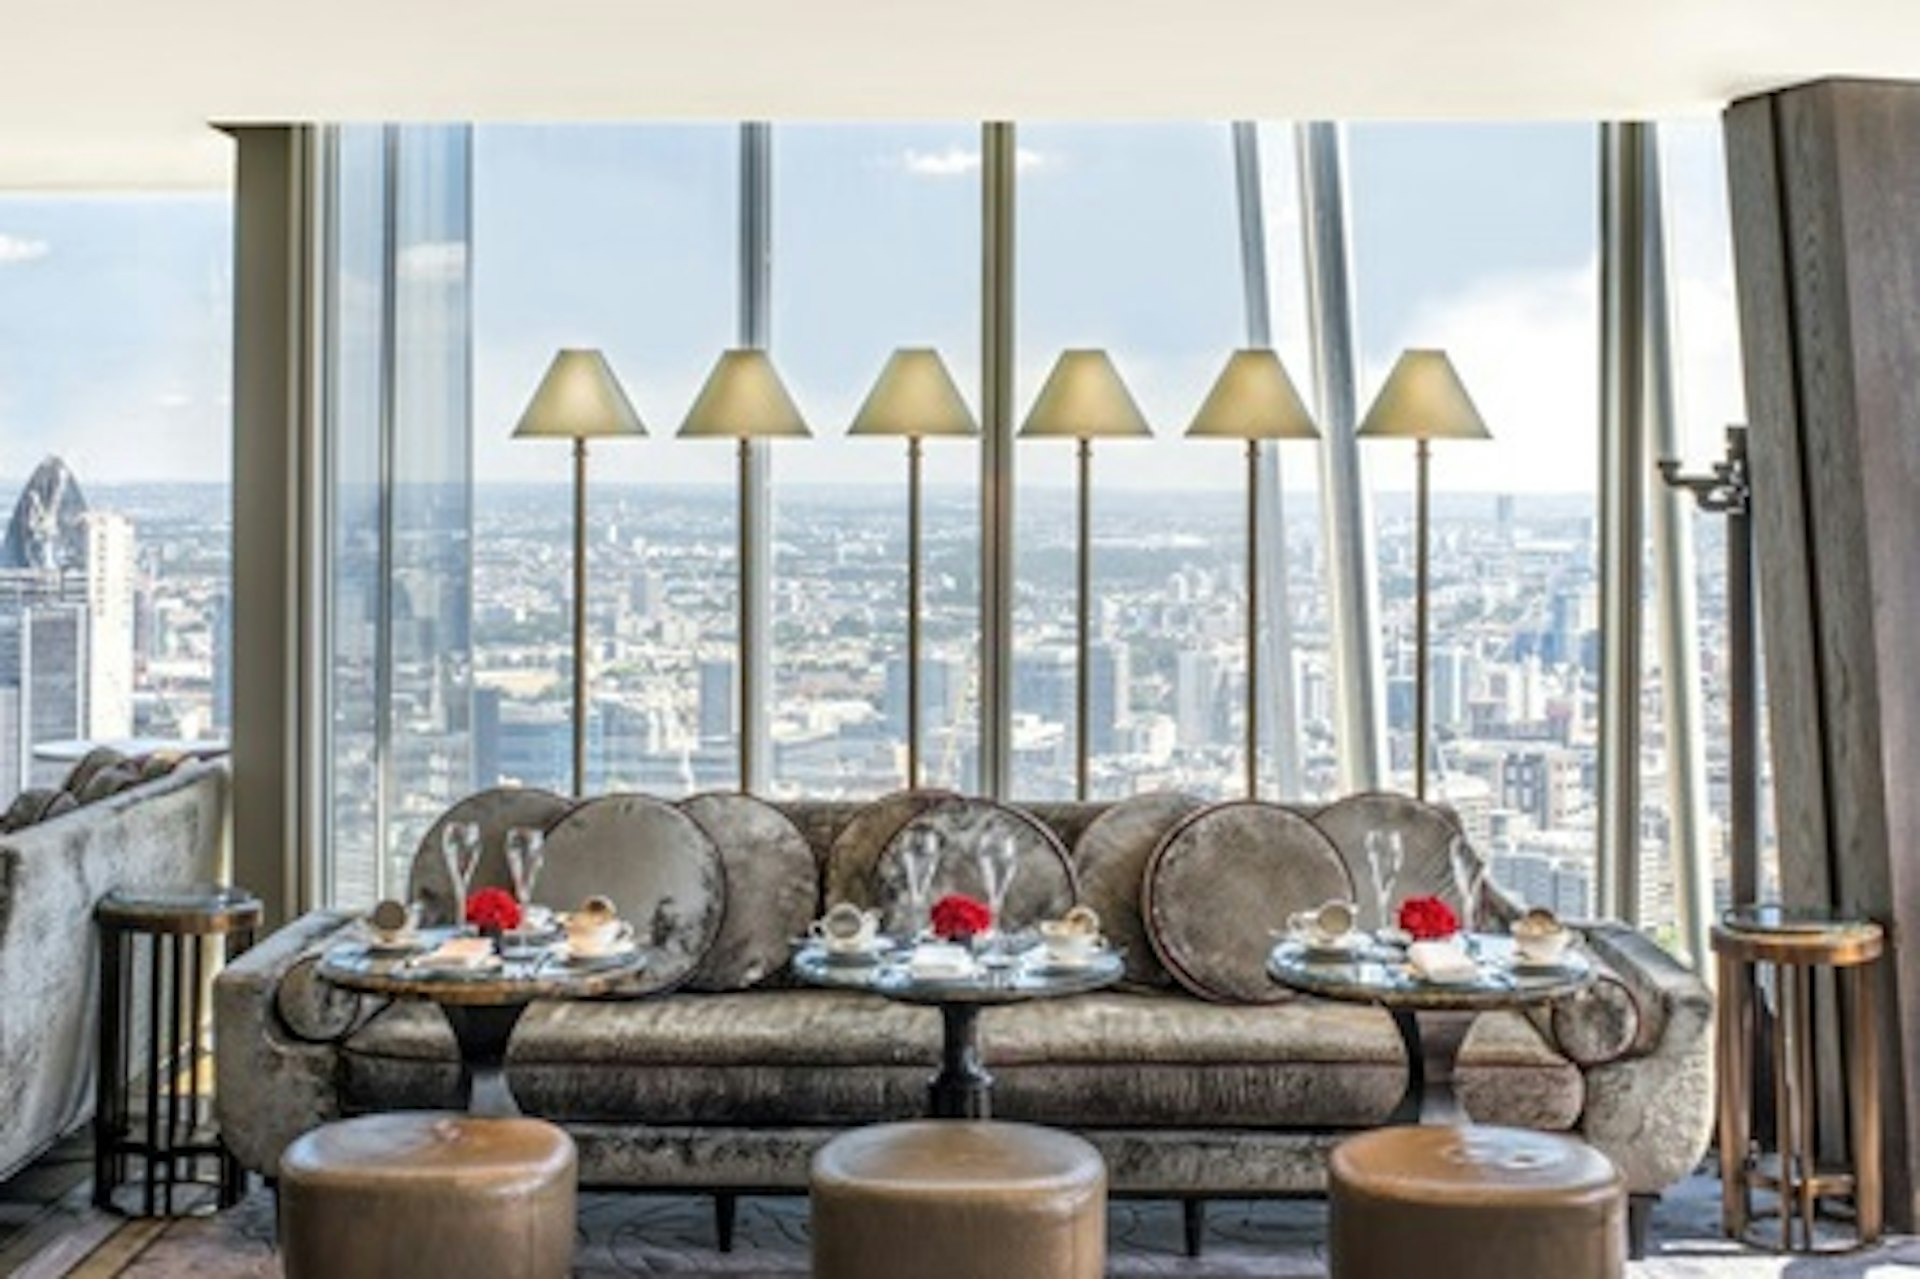 Liquid Afternoon Tea for Two at Gong within the 5* Luxury Shangri-La at The Shard, London 4